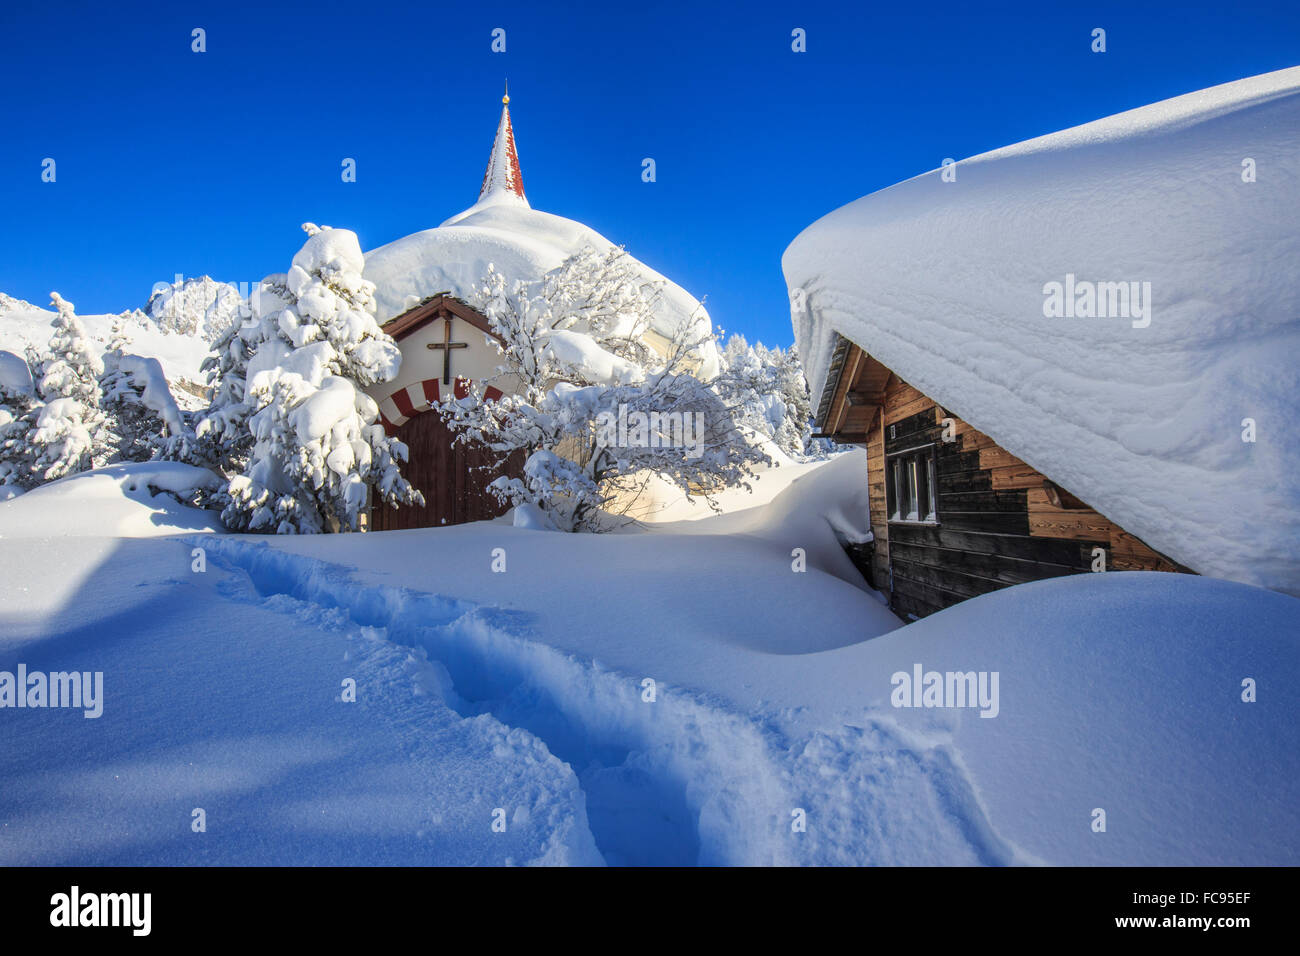 The small church and the house submerged by snow after a heavy snowfall in Maloja, Engadine, Graubunden Canton, Switzerland Stock Photo